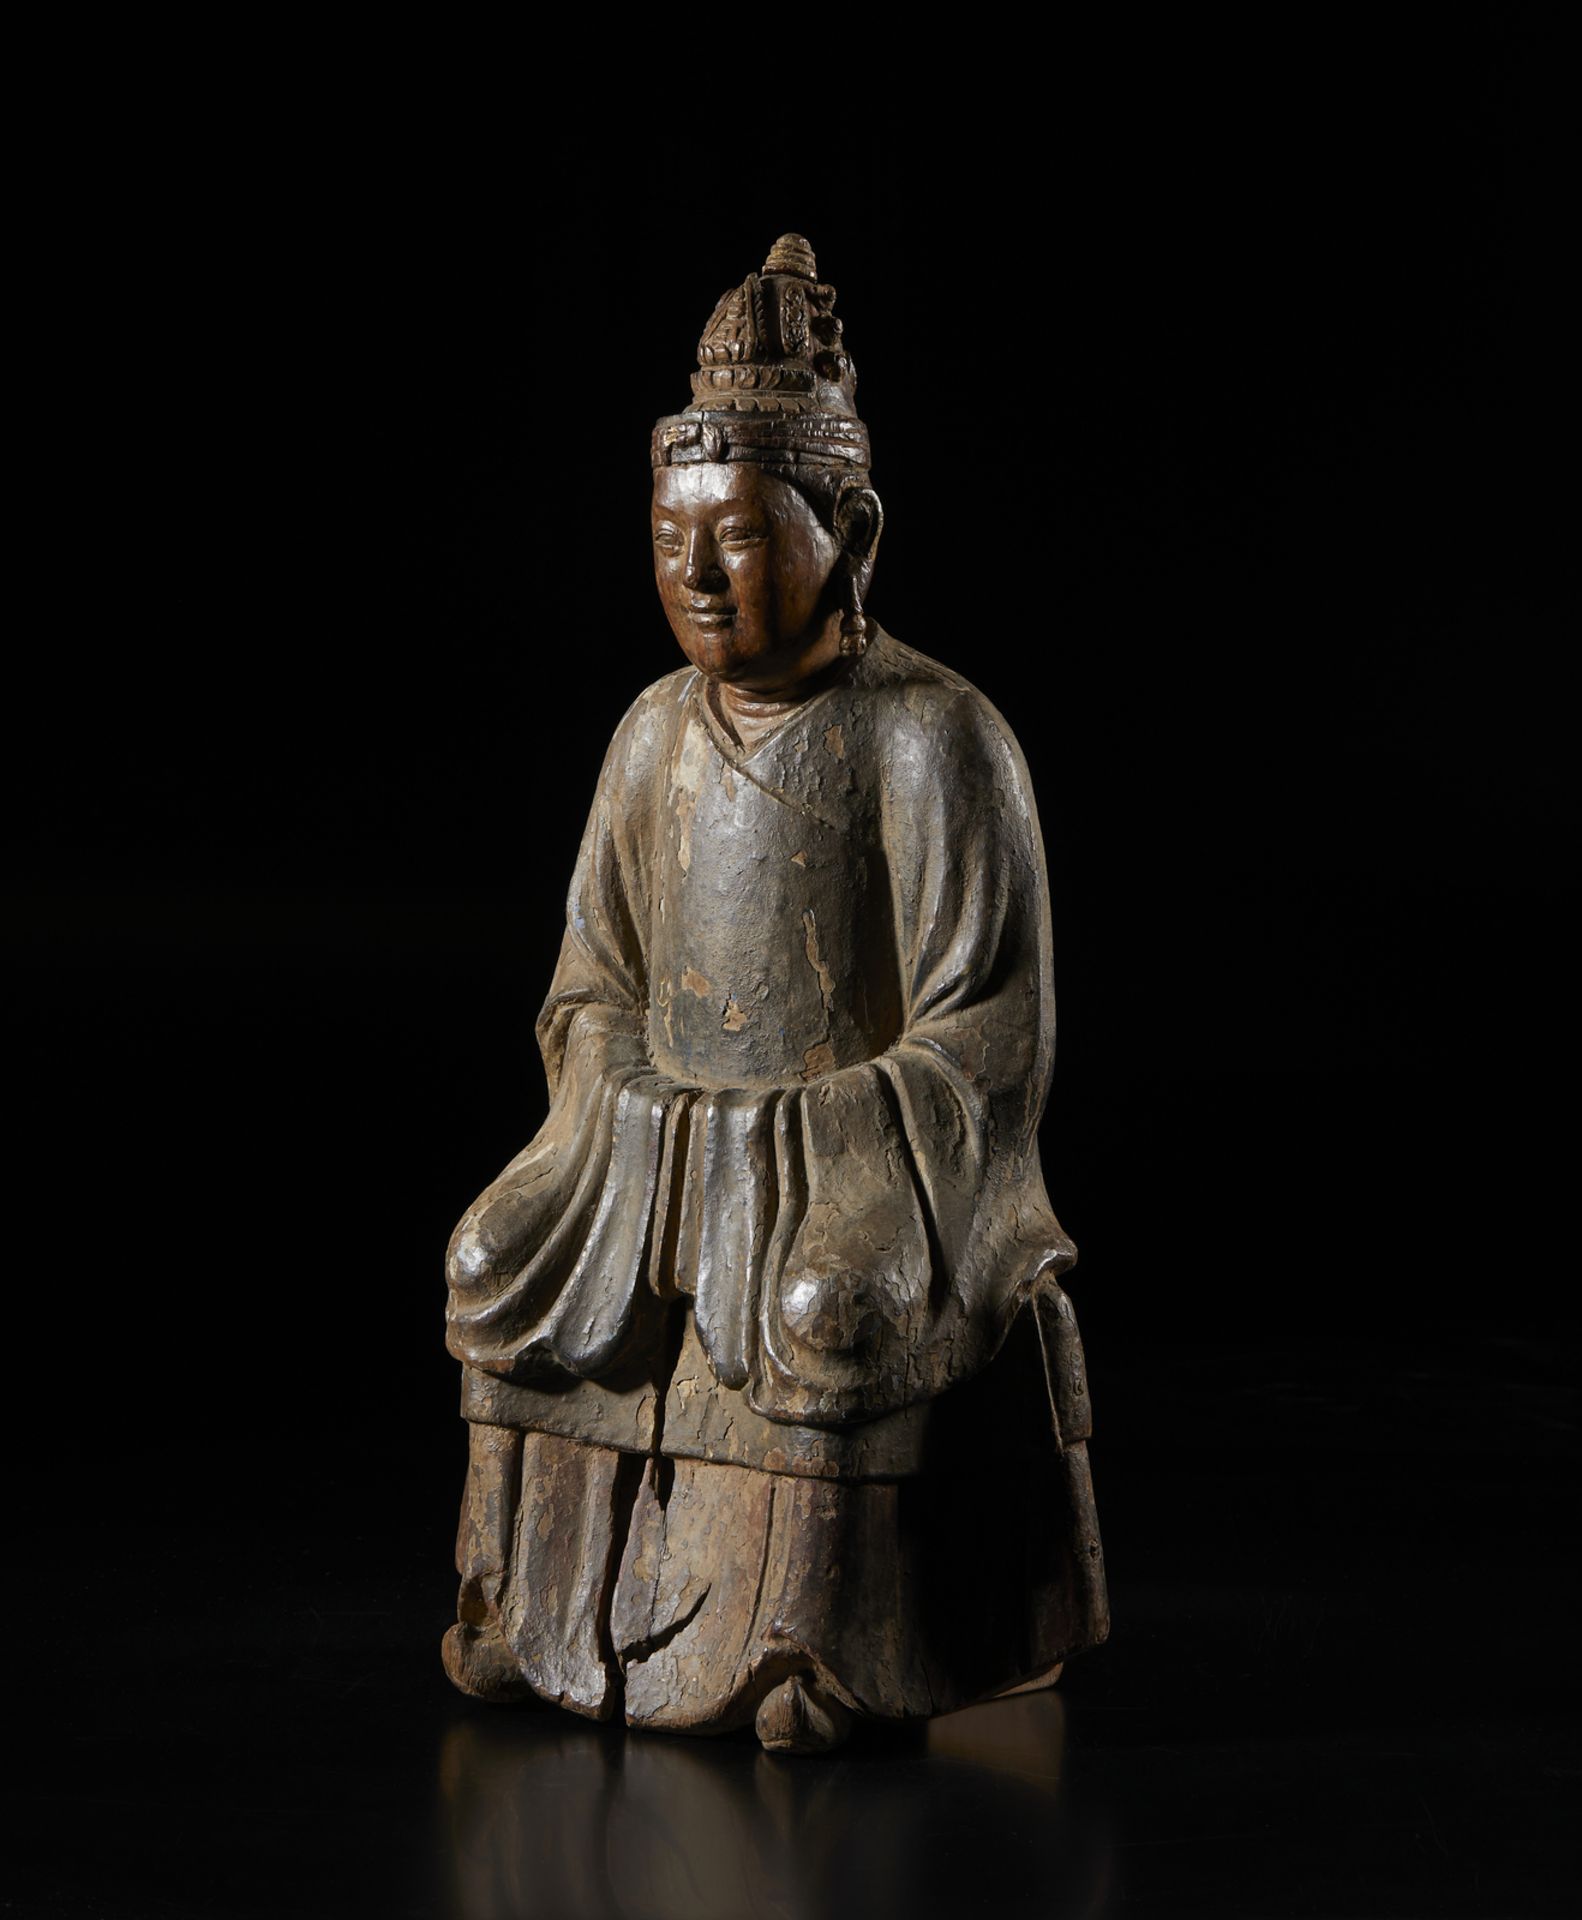 Arte Cinese A wooden lacquered figure of a seated dignitary China, Ming dynasty, 16th century .